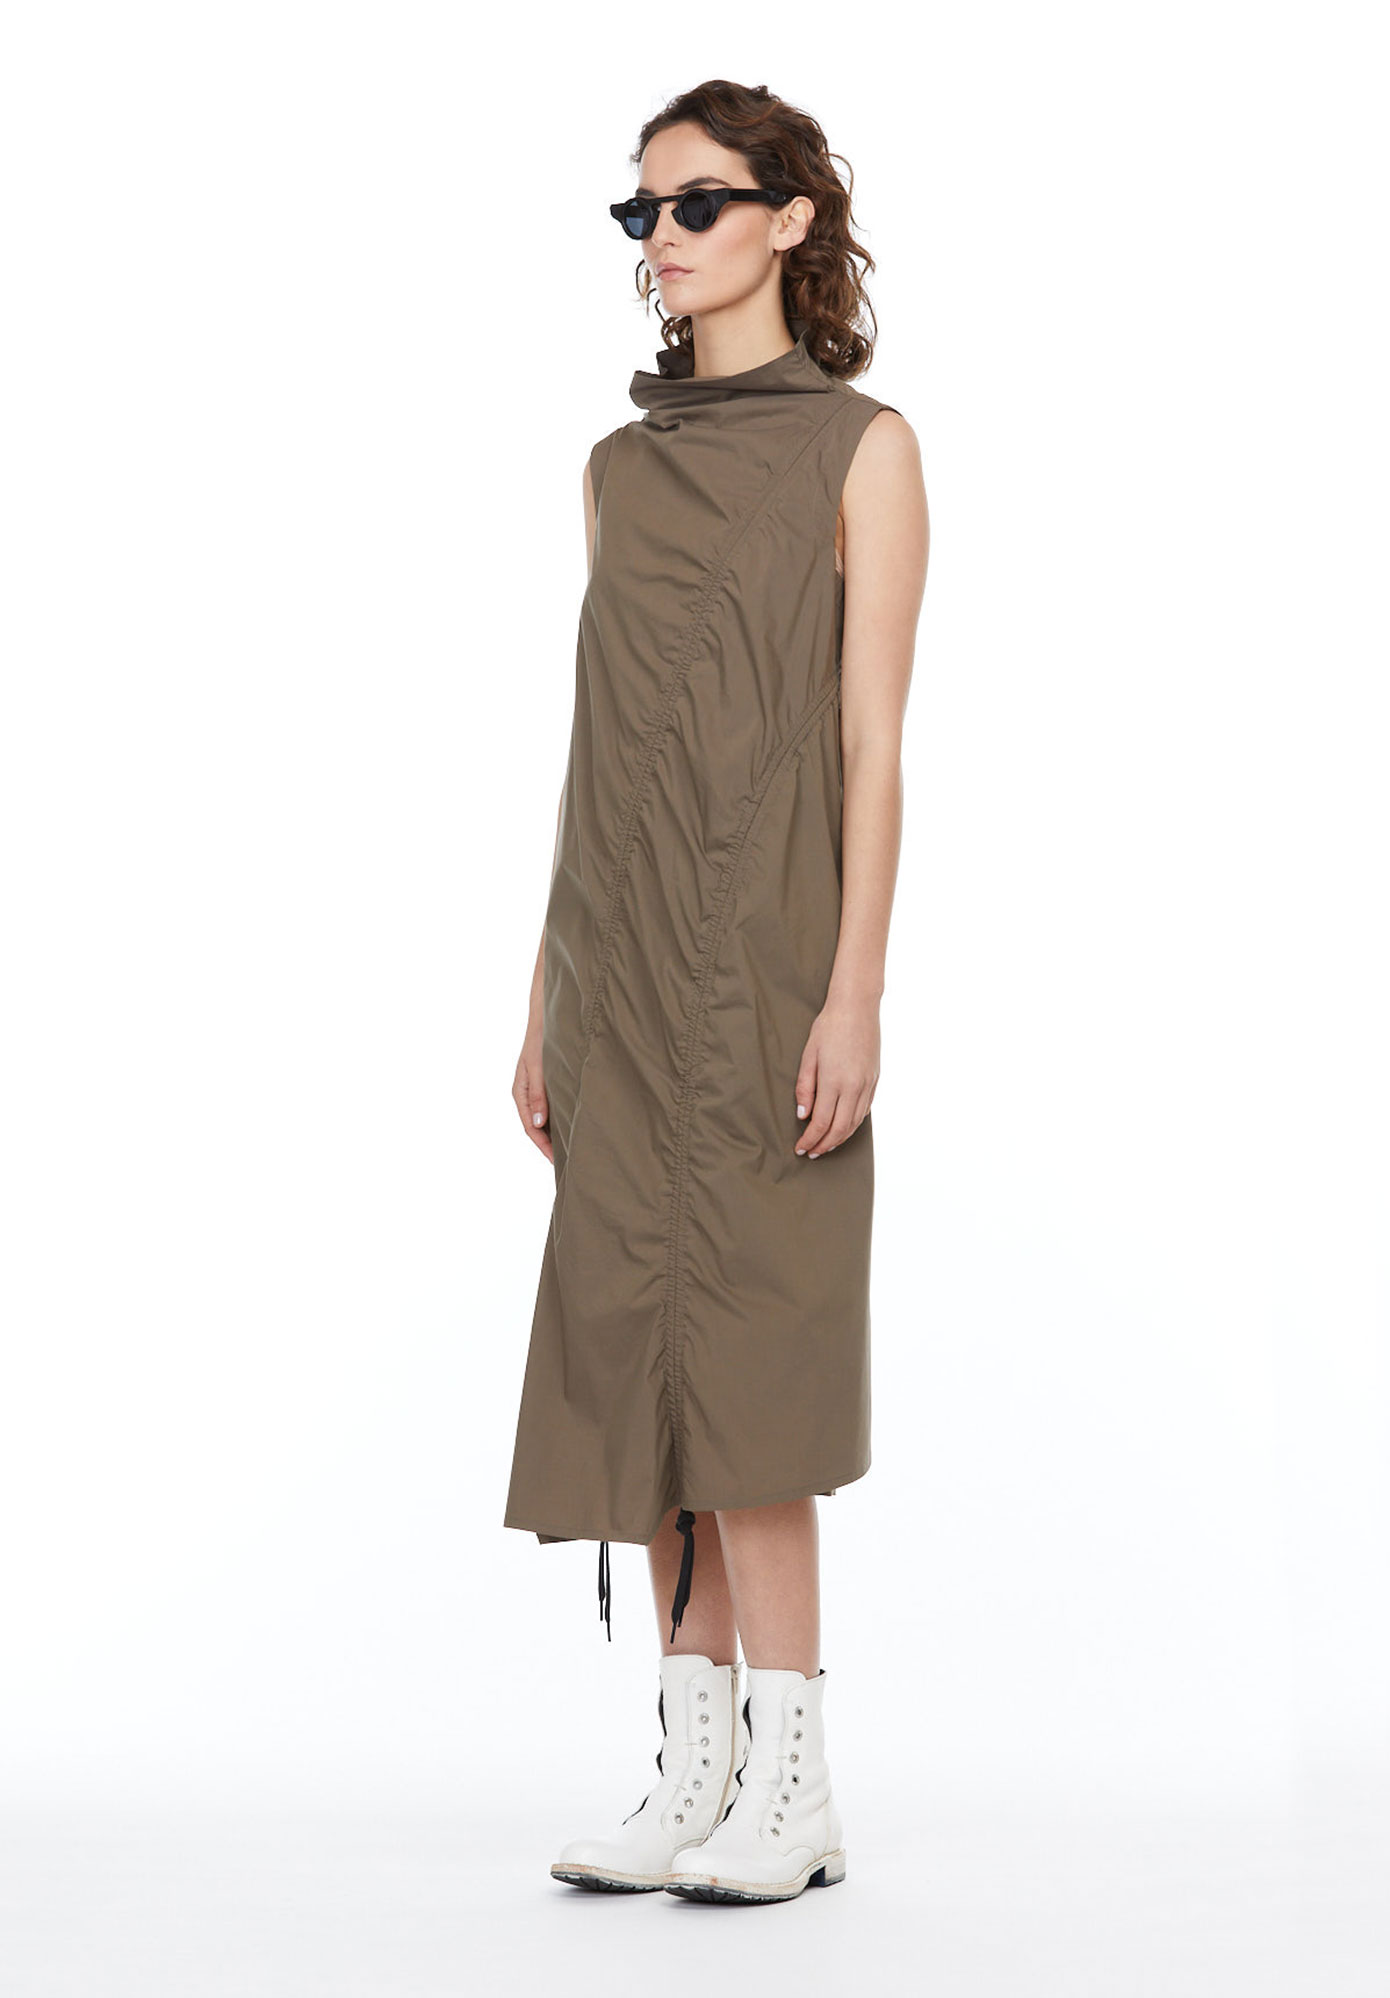 INTERVAL CHANNEL DRESS - FLAX